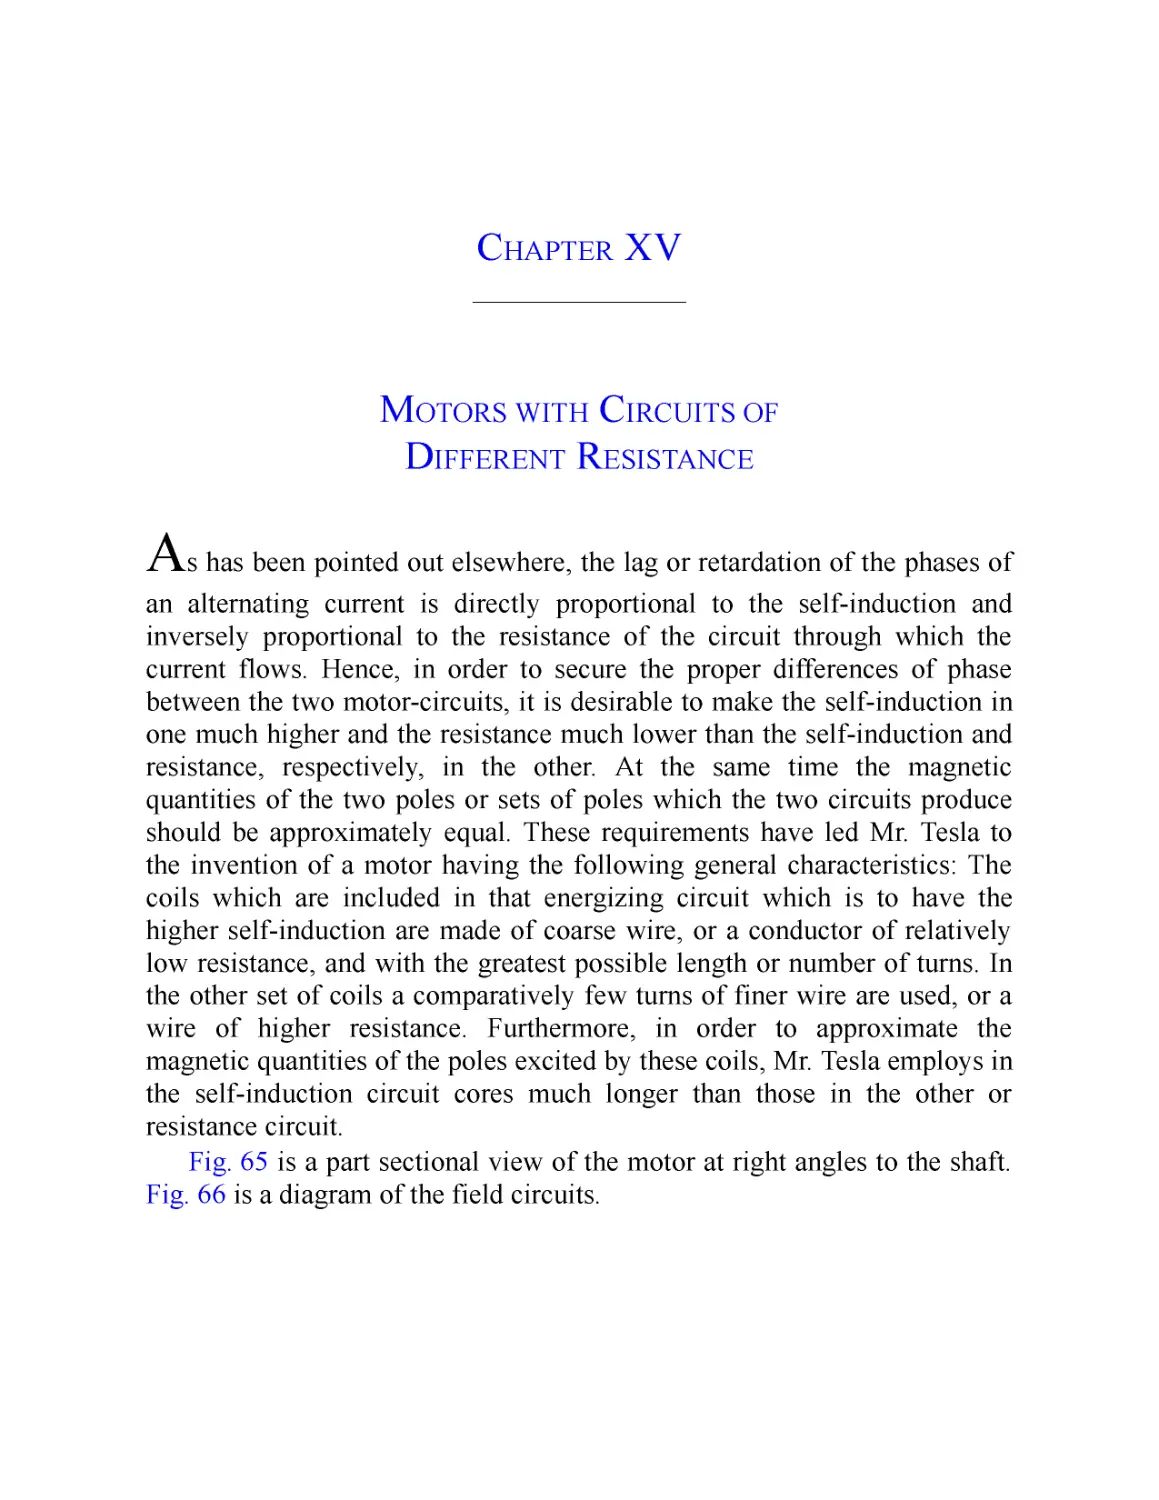 ﻿Chapter XV: Motors with Circuits of Different Resistanc